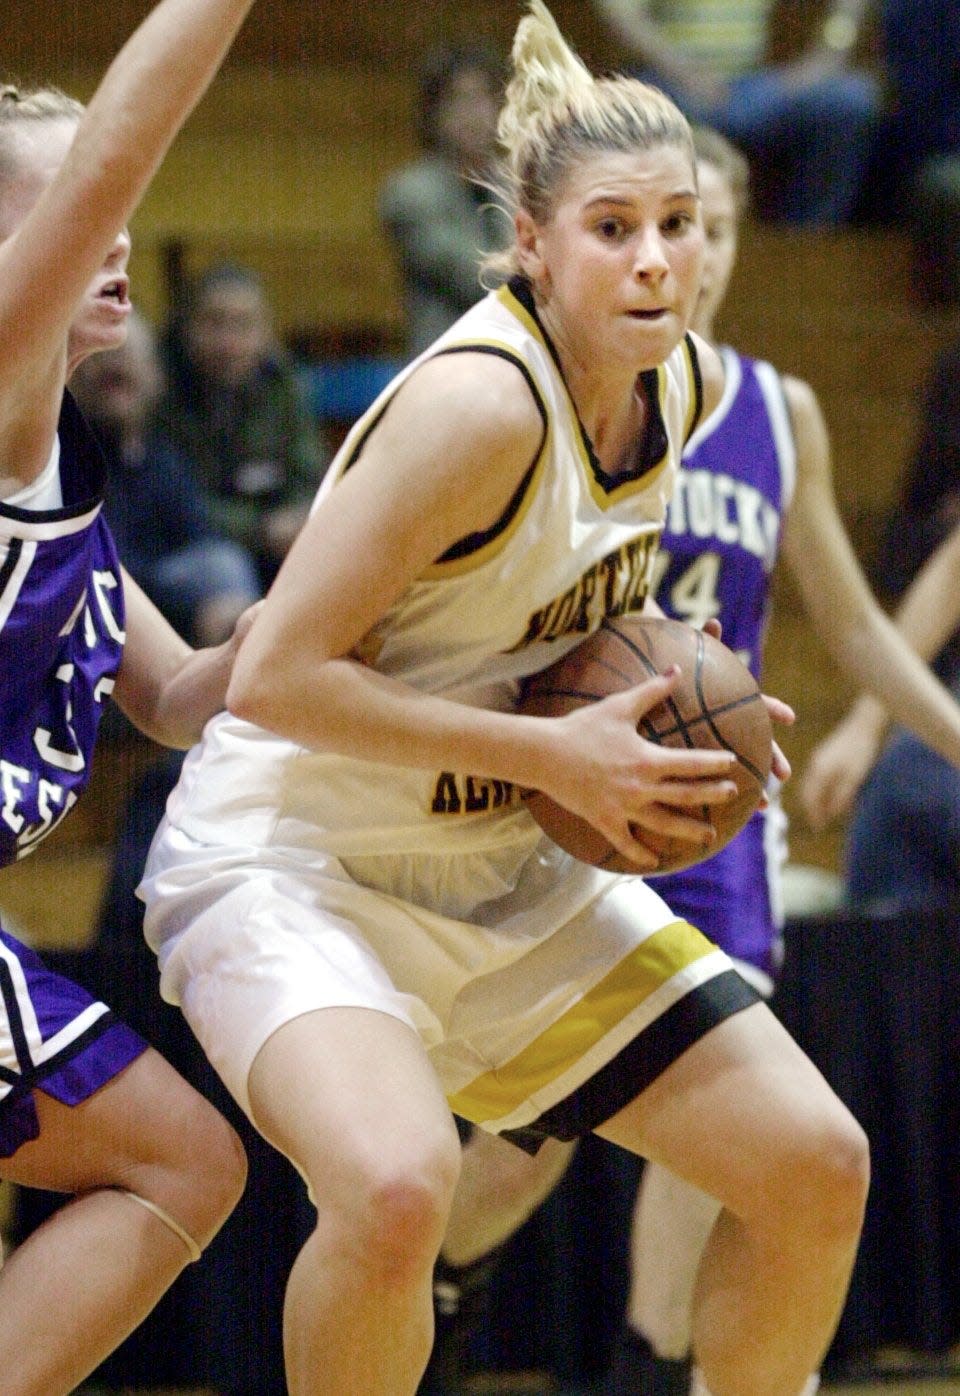 Michelle Cottrell played basketball at Northern Kentucky University, where she is still the all-time leading scorer (2.241 points)